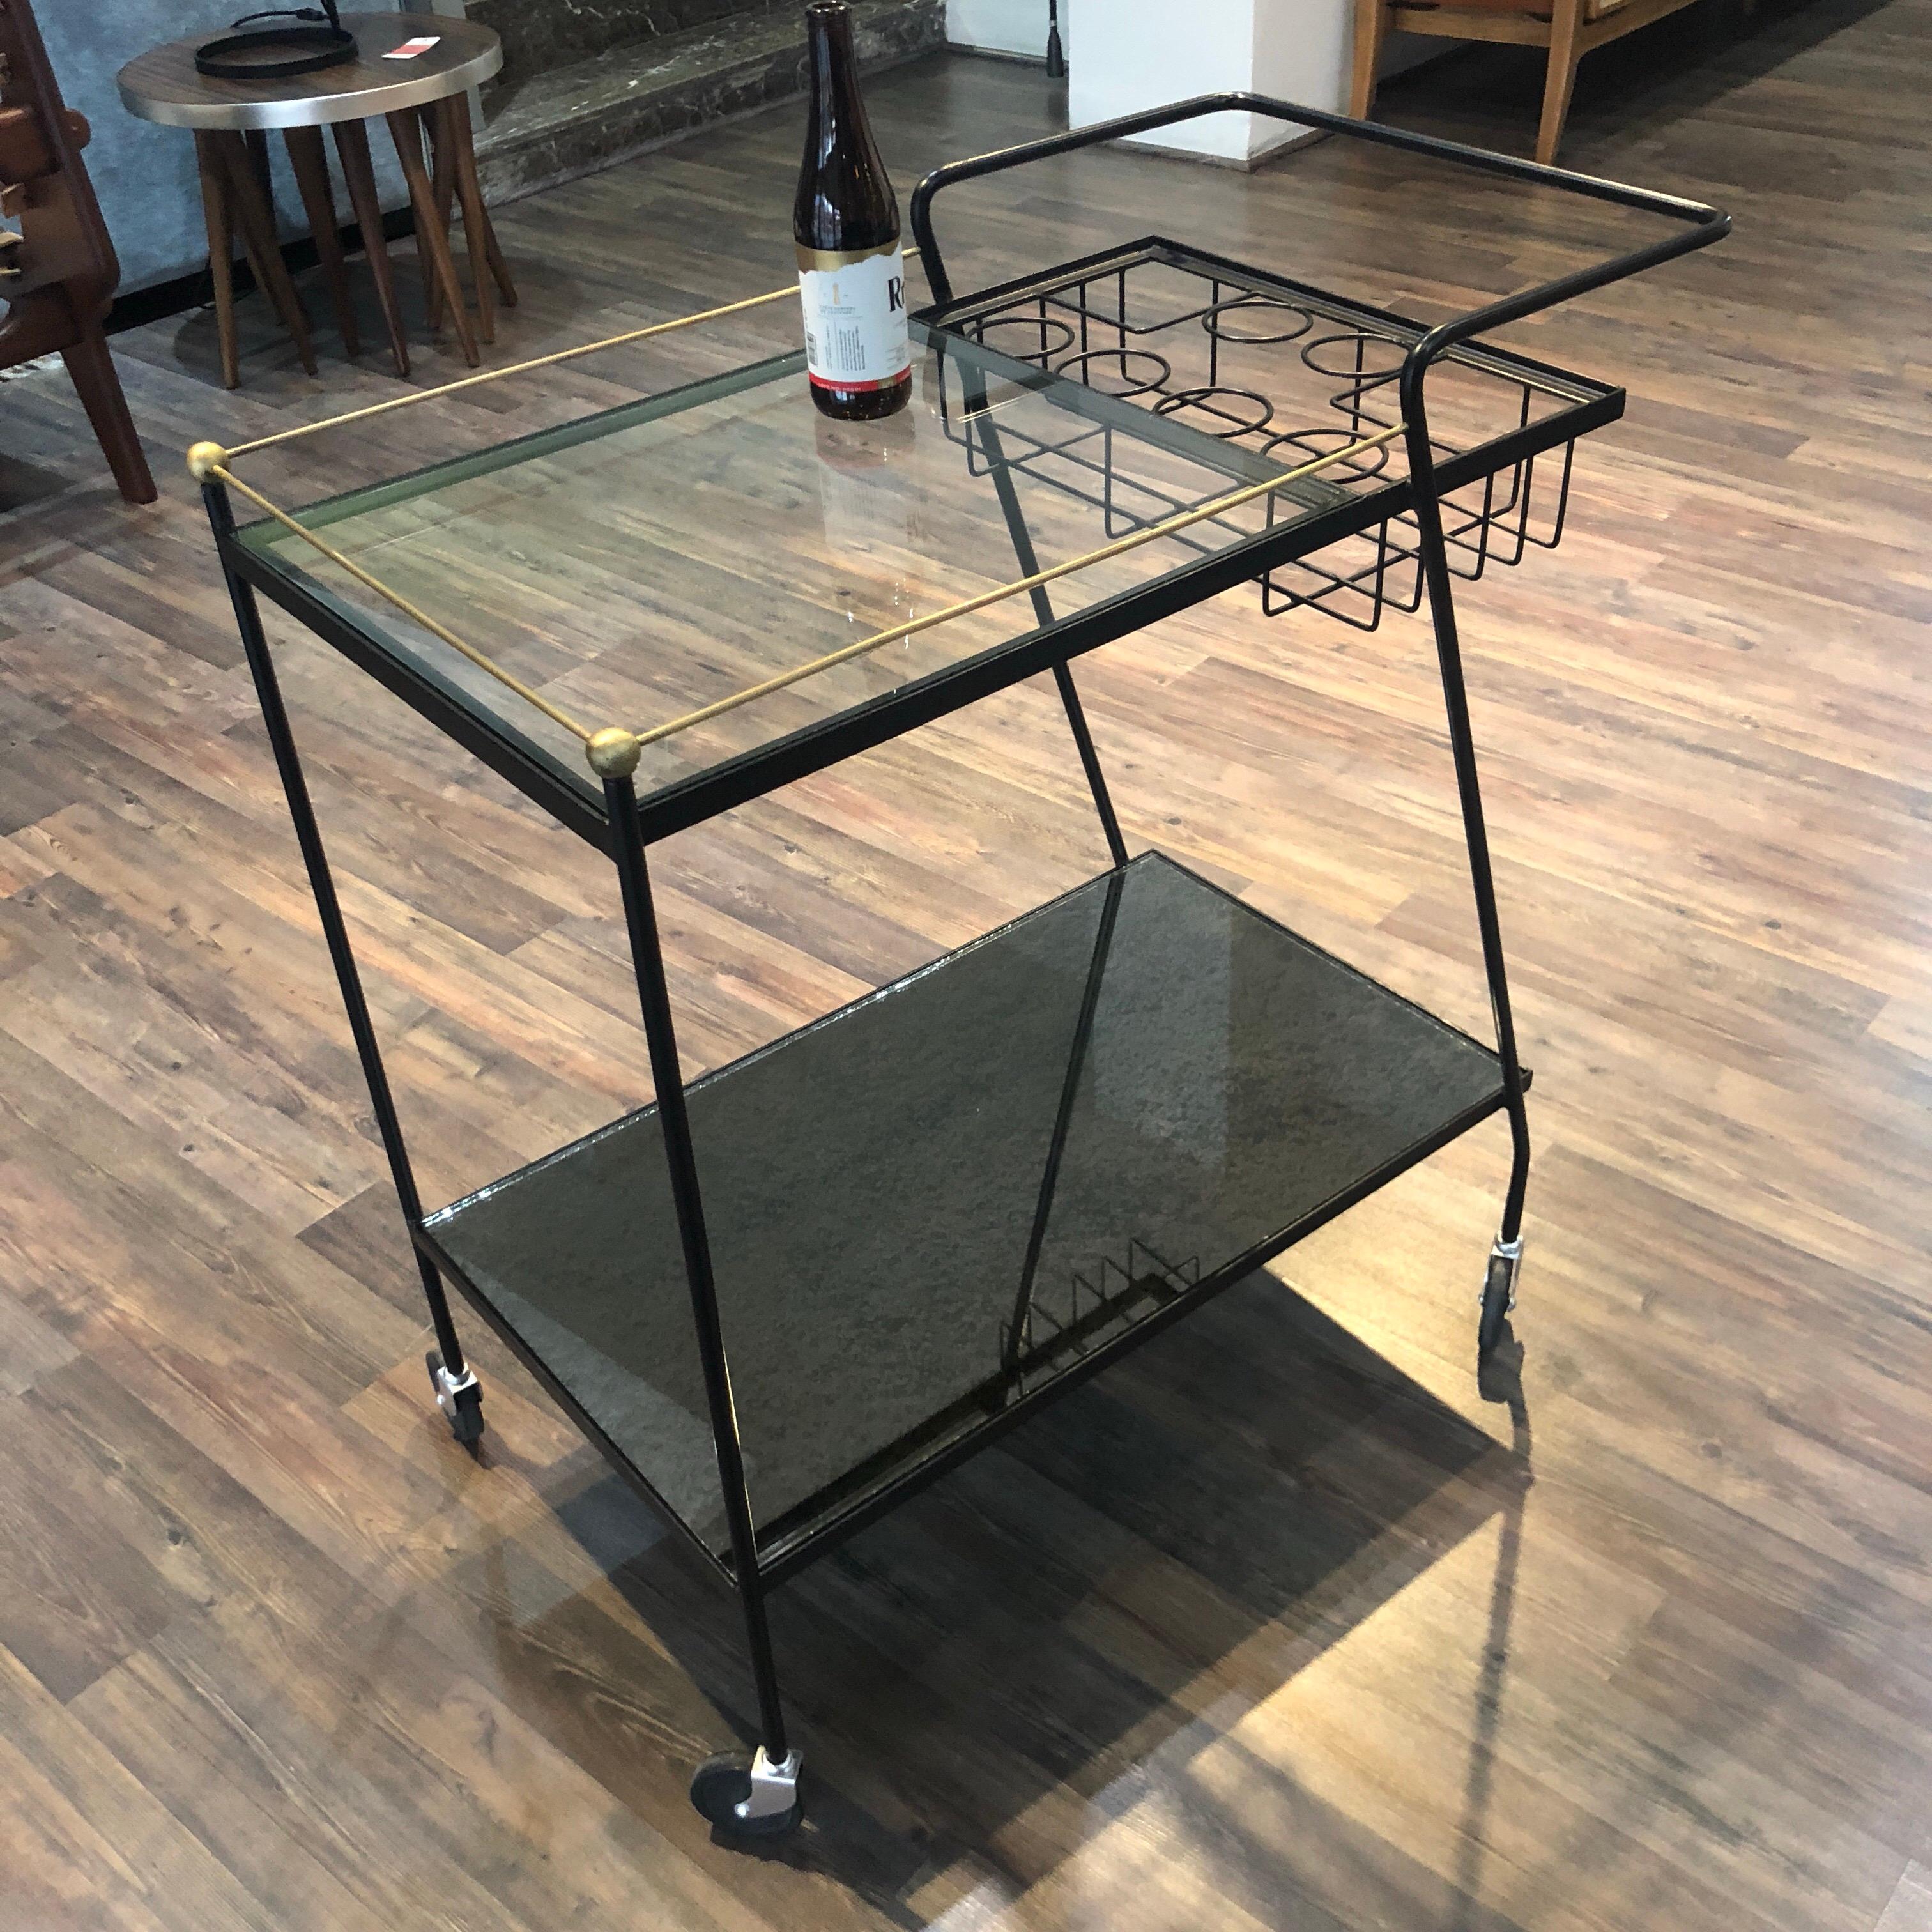 Iron bar cart with brass accents, the first cover is made of glass and the one on the bottom is an aged mirror, the style is very similar to Pani's designs but without confirming its authorship.